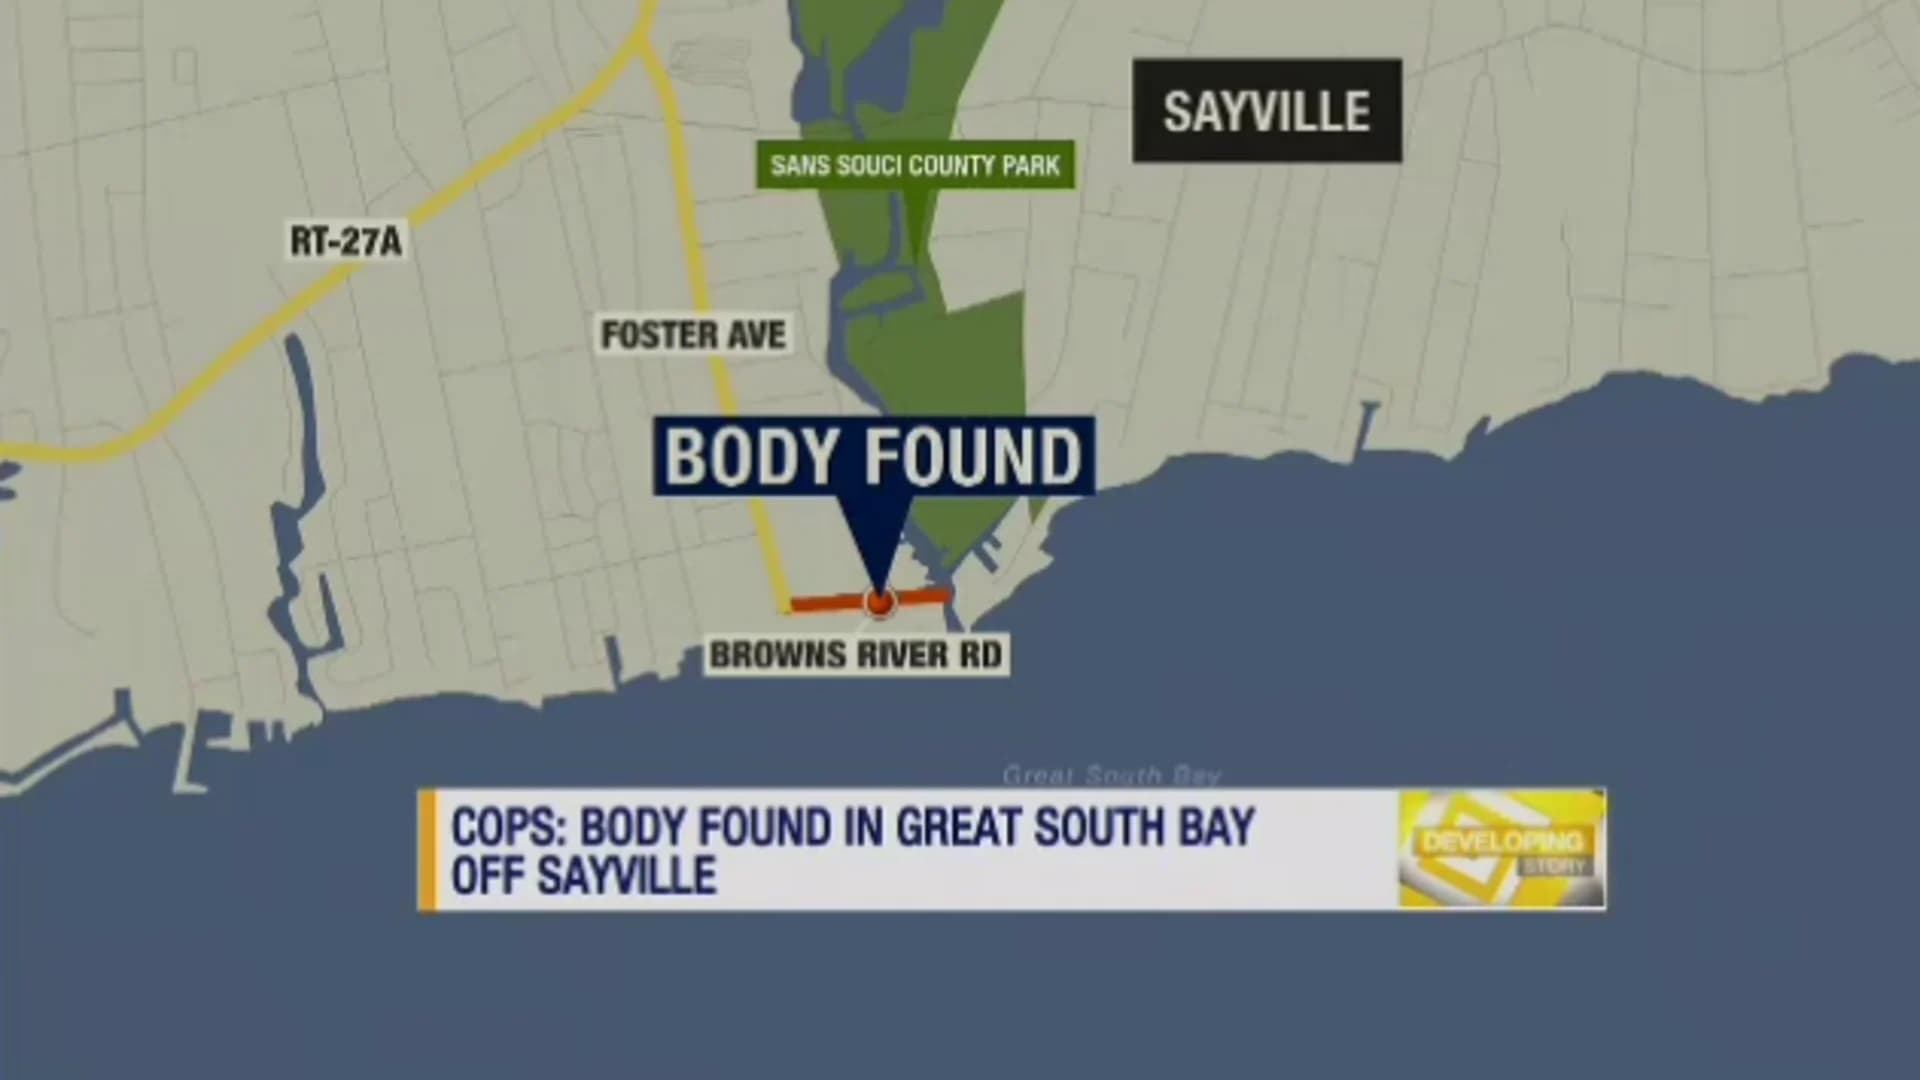 Police work to ID body of man found in water off Sayville